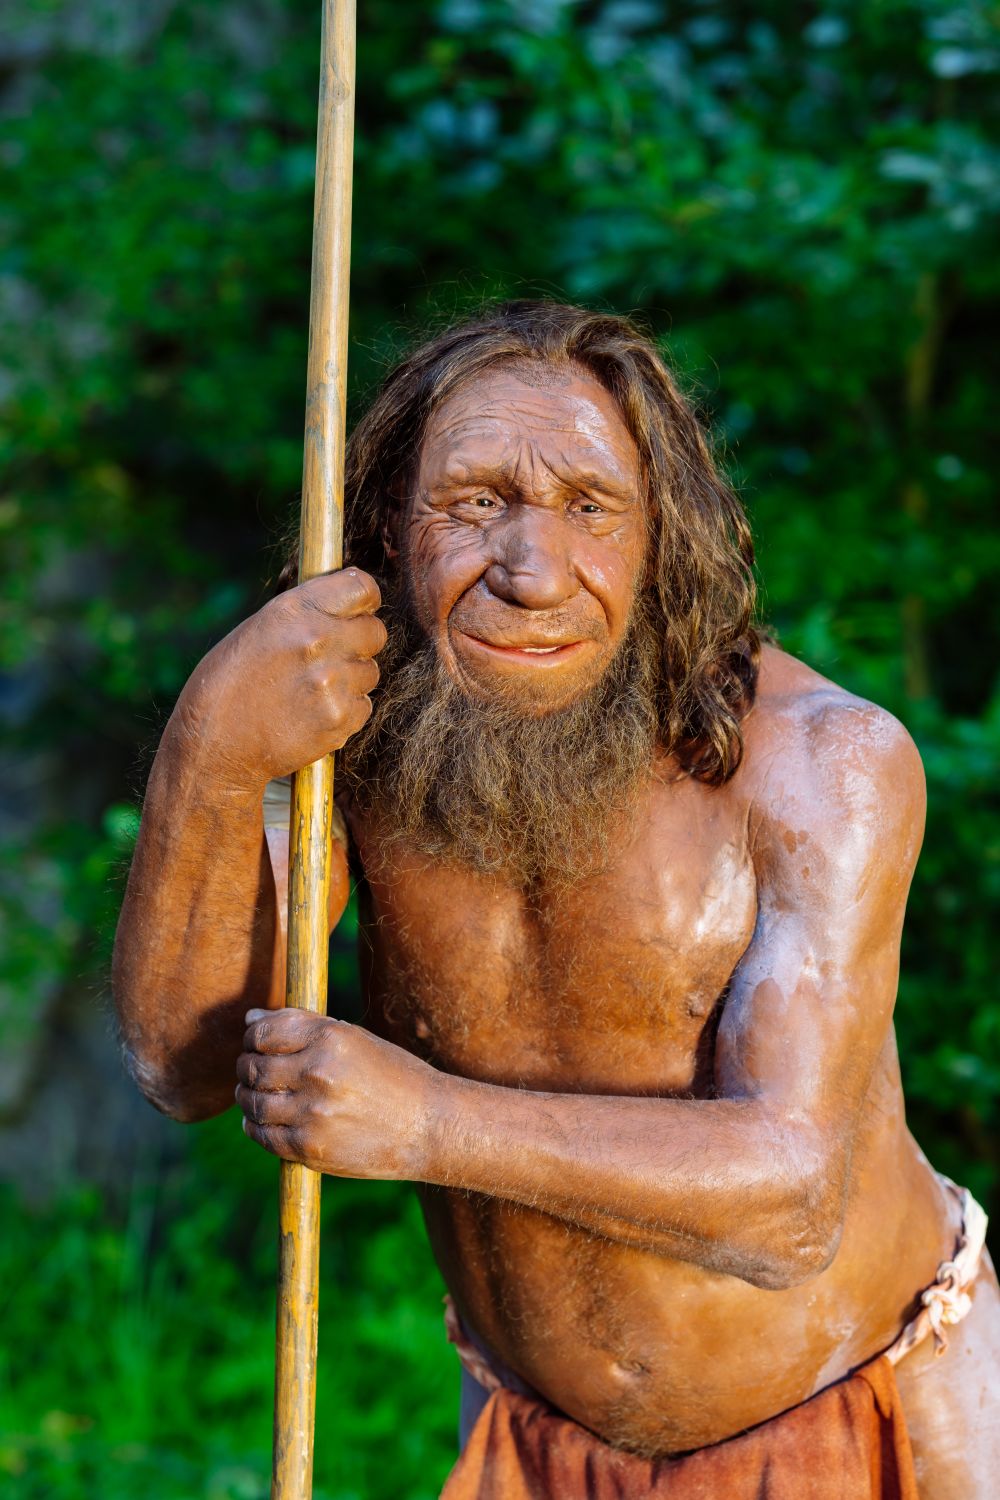 Life-size reconstruction of a Neanderthal man